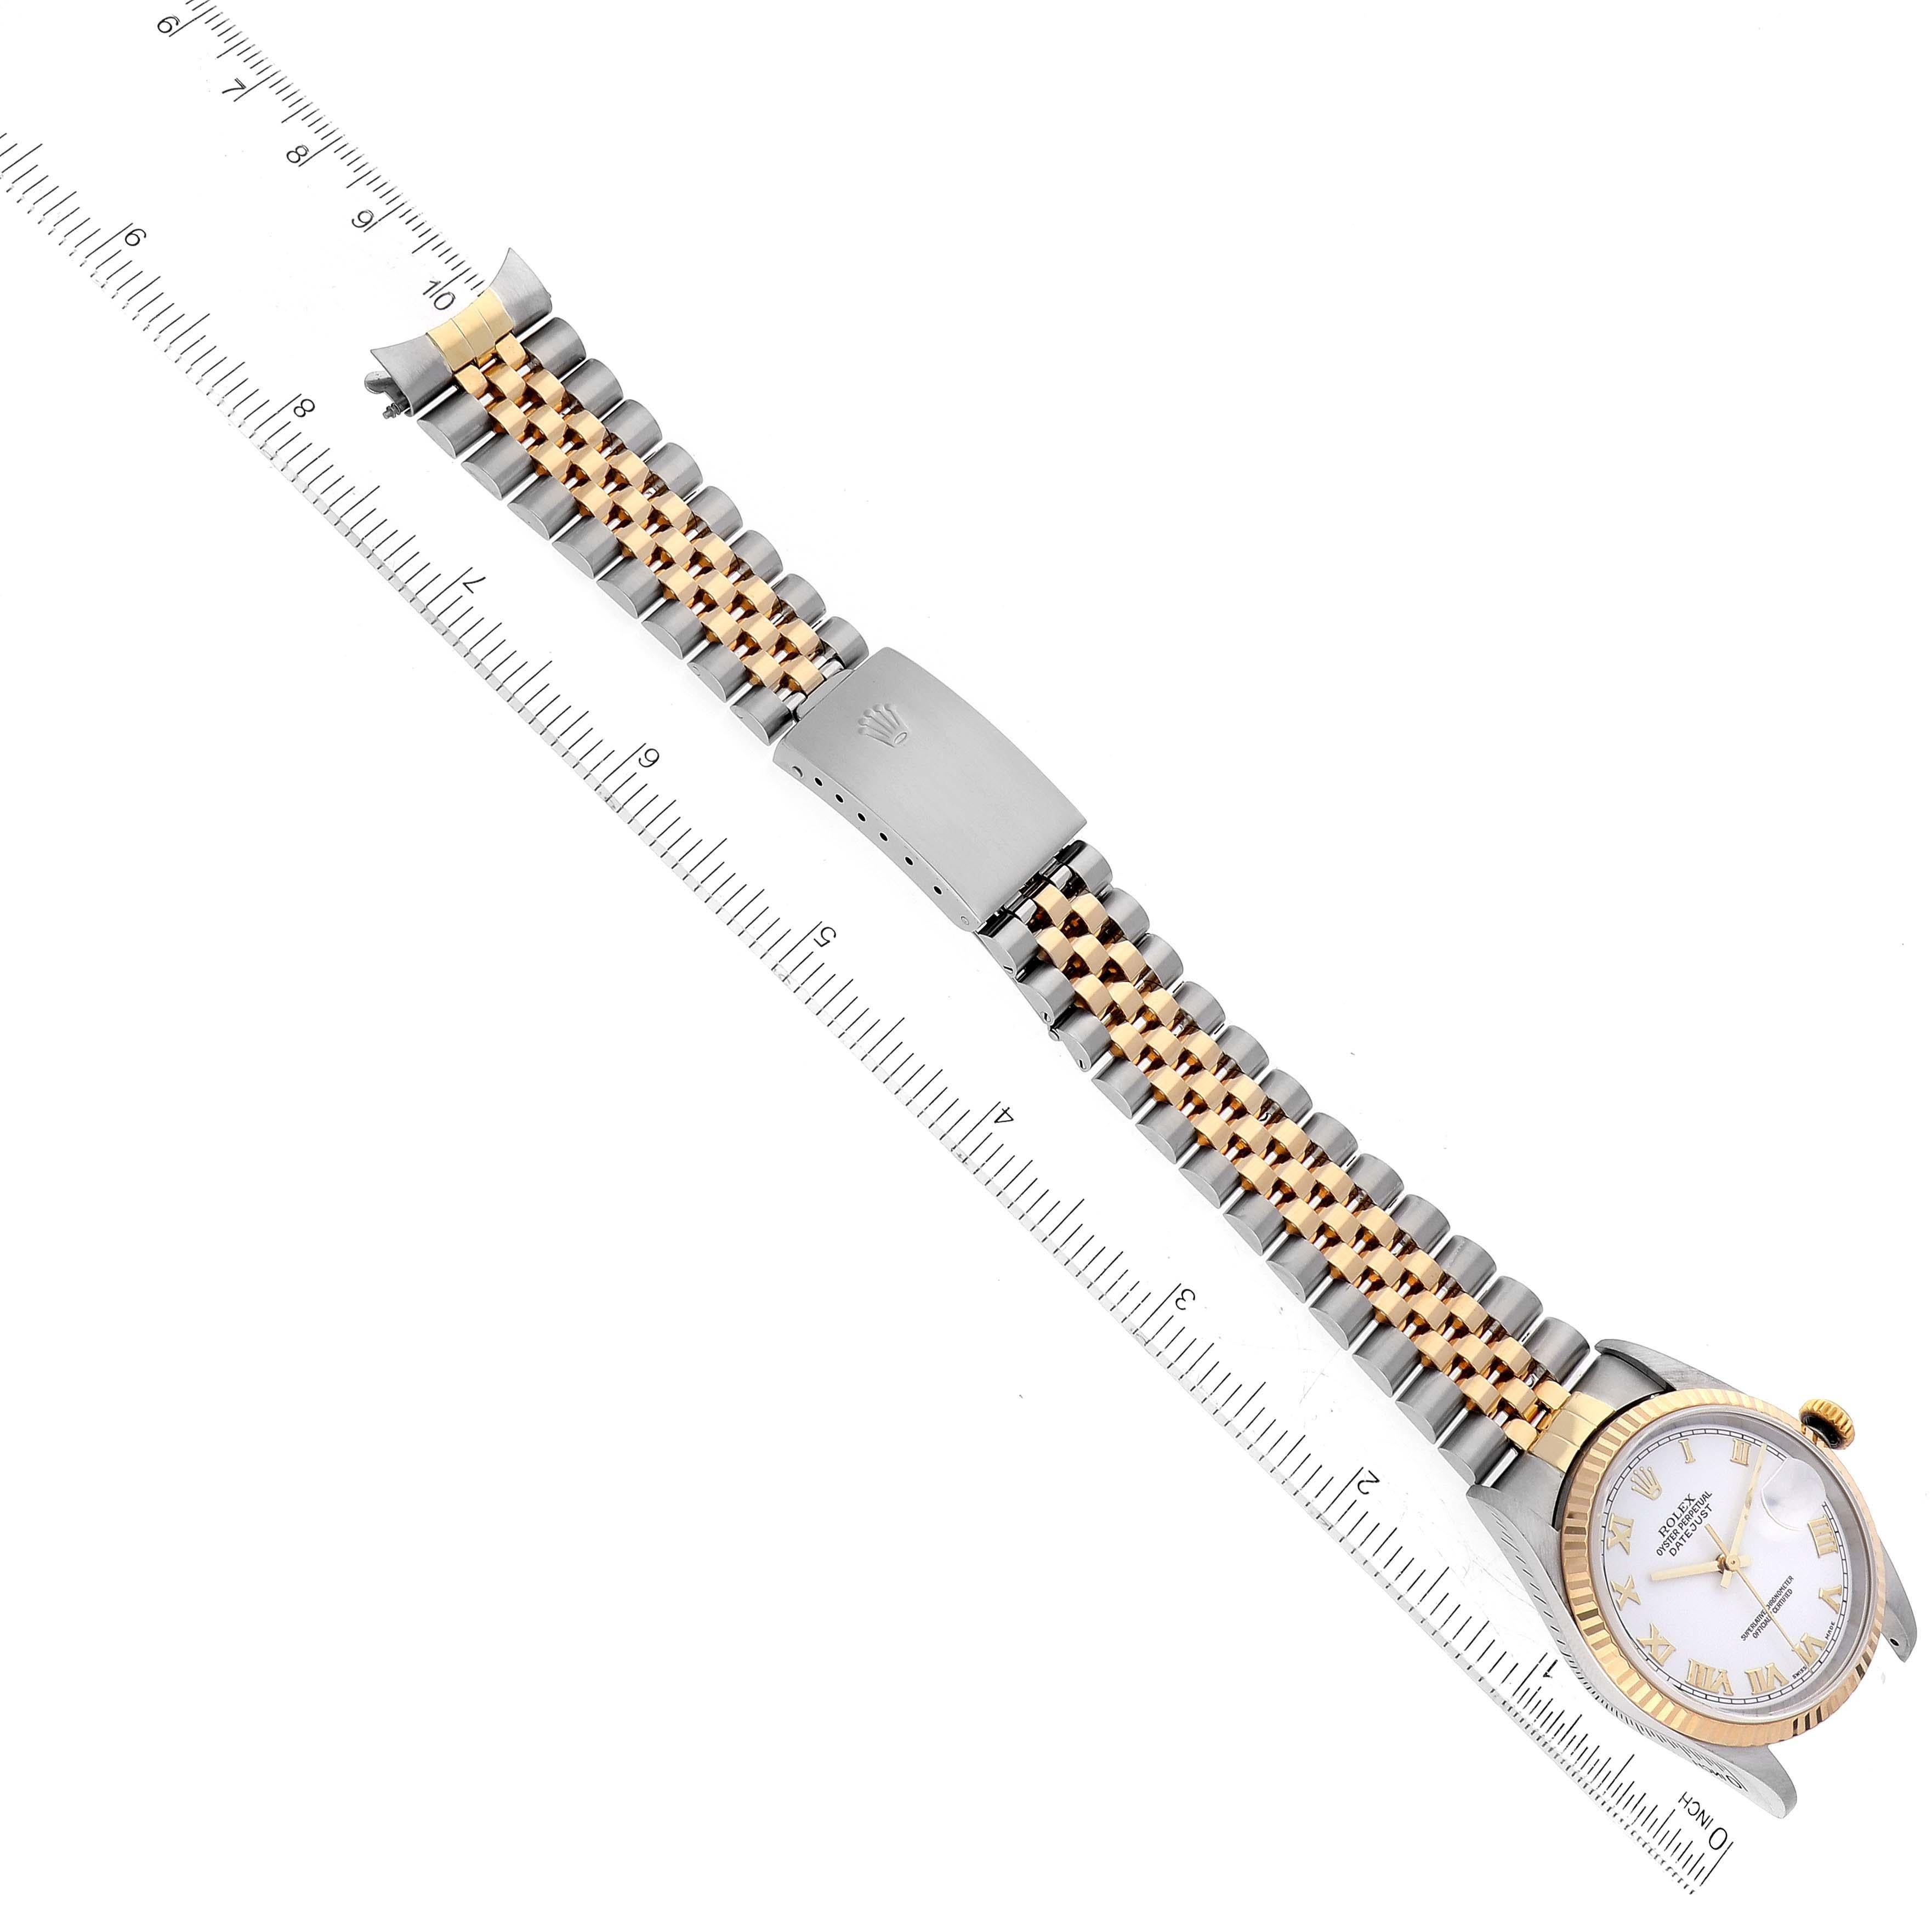 Rolex Datejust Steel Yellow Gold White Dial Mens Watch 16233 4